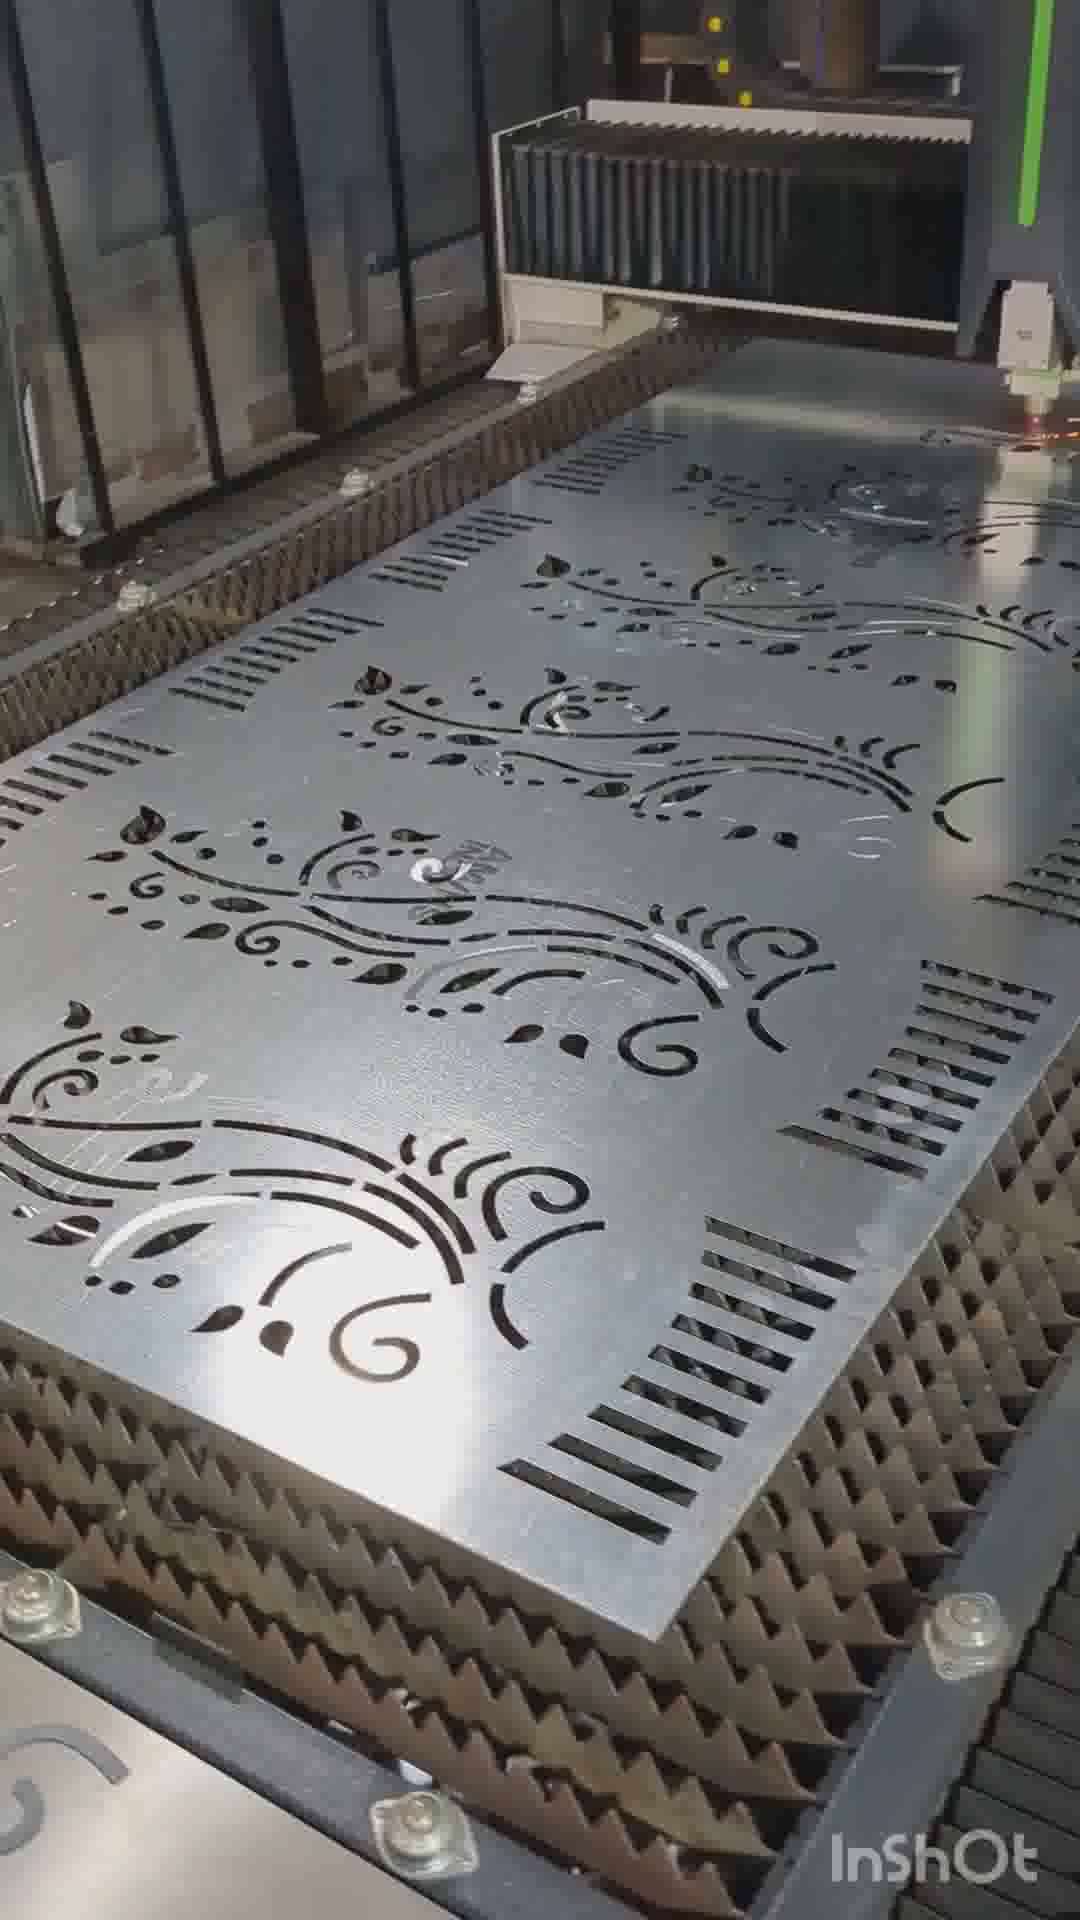 For more details on Gate design on Laser Cutting and CNC Machining, please contact+91 974 174 0227 #Lasercutting #gatedesigns #cnclasercutting #cncwoodrouter #cncwoodworking #lasercutscreens